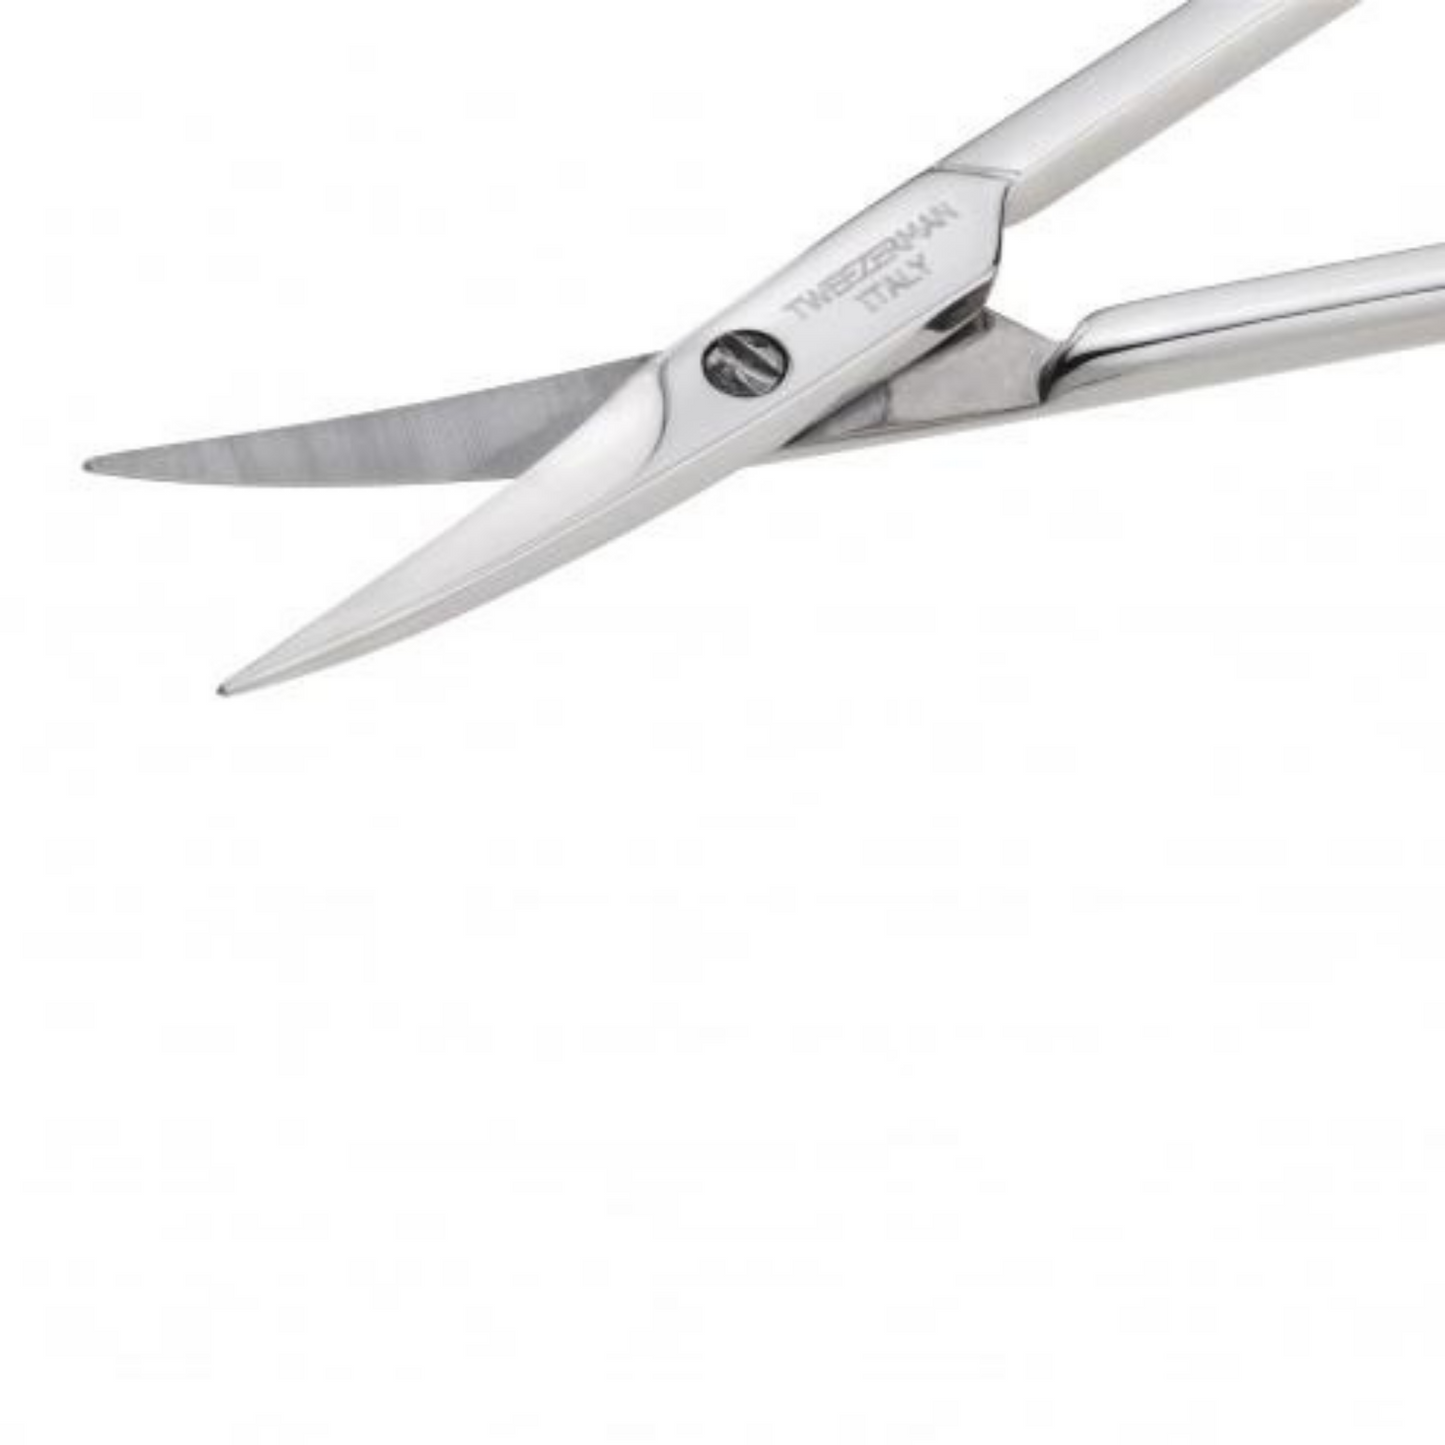 https://www.smallflower.com/cdn/shop/products/ProductListing-PrimaryimageofNickel-PlatedCuticleScissors2_1445x.png?v=1647035747